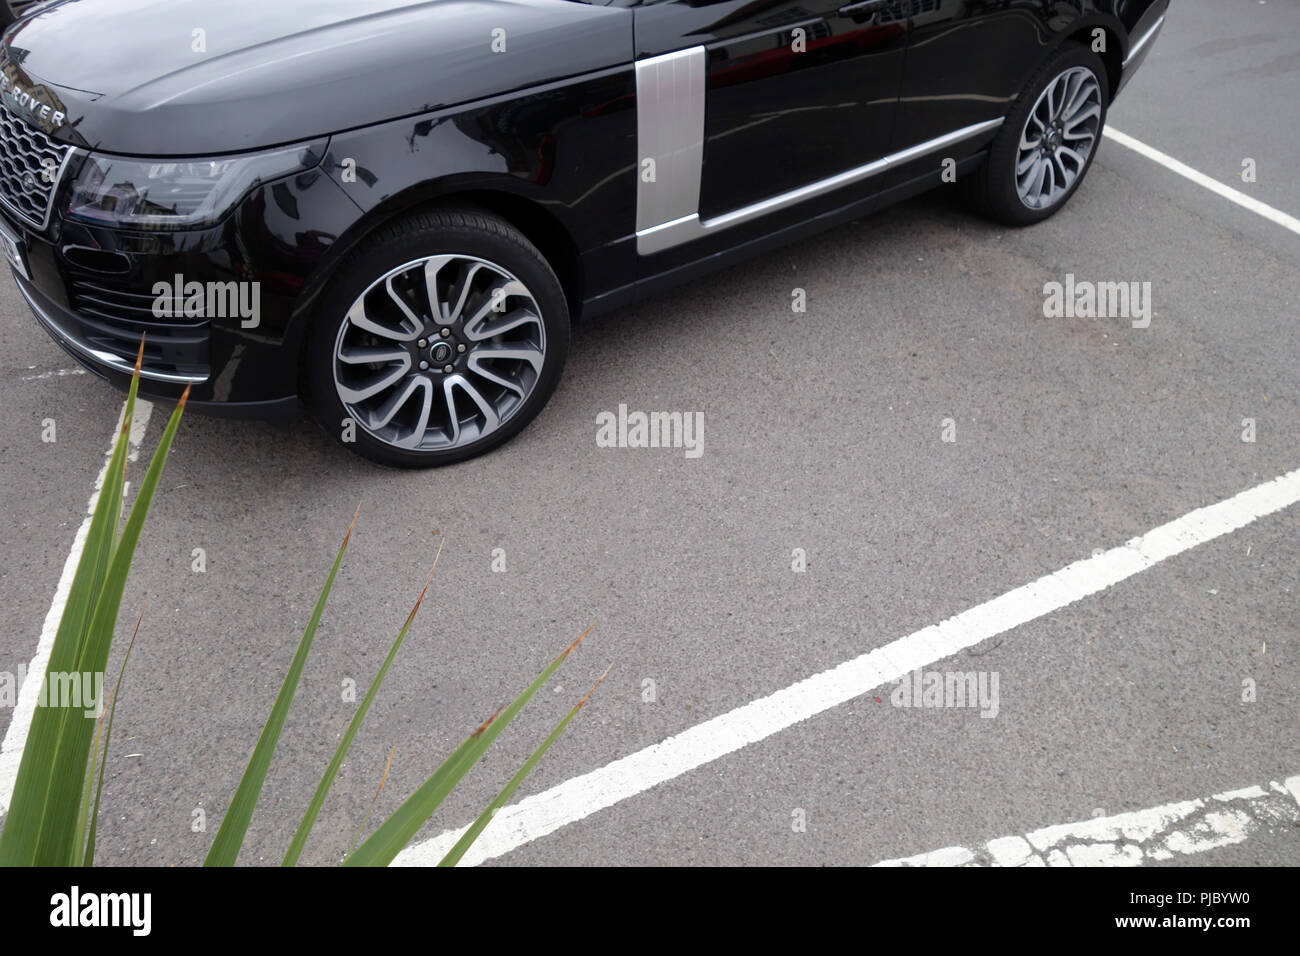 Badly Parked Range Rover in parking bay Stock Photo